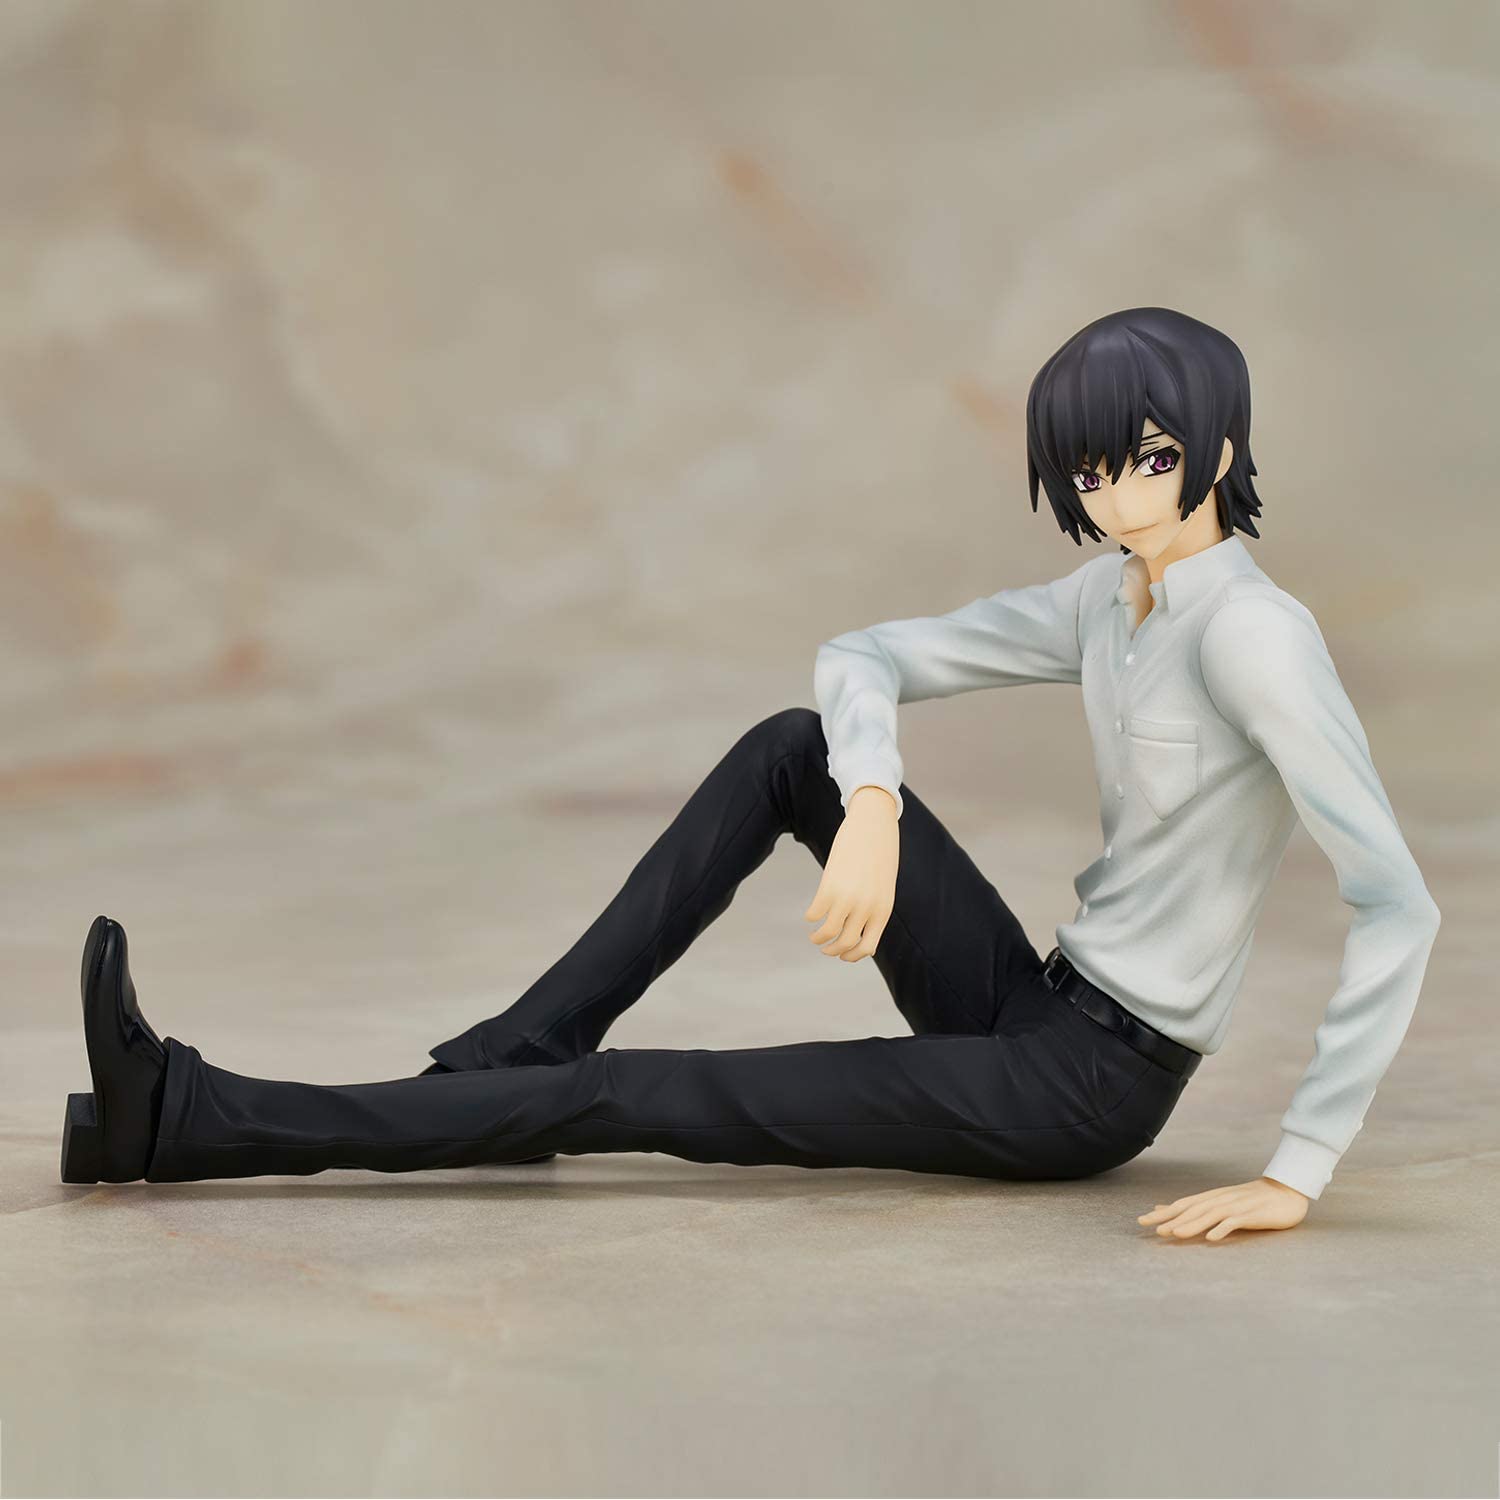 Code Geass: Lelouch of the Rebellion Lelouch Lamperouge Complete Figure | animota